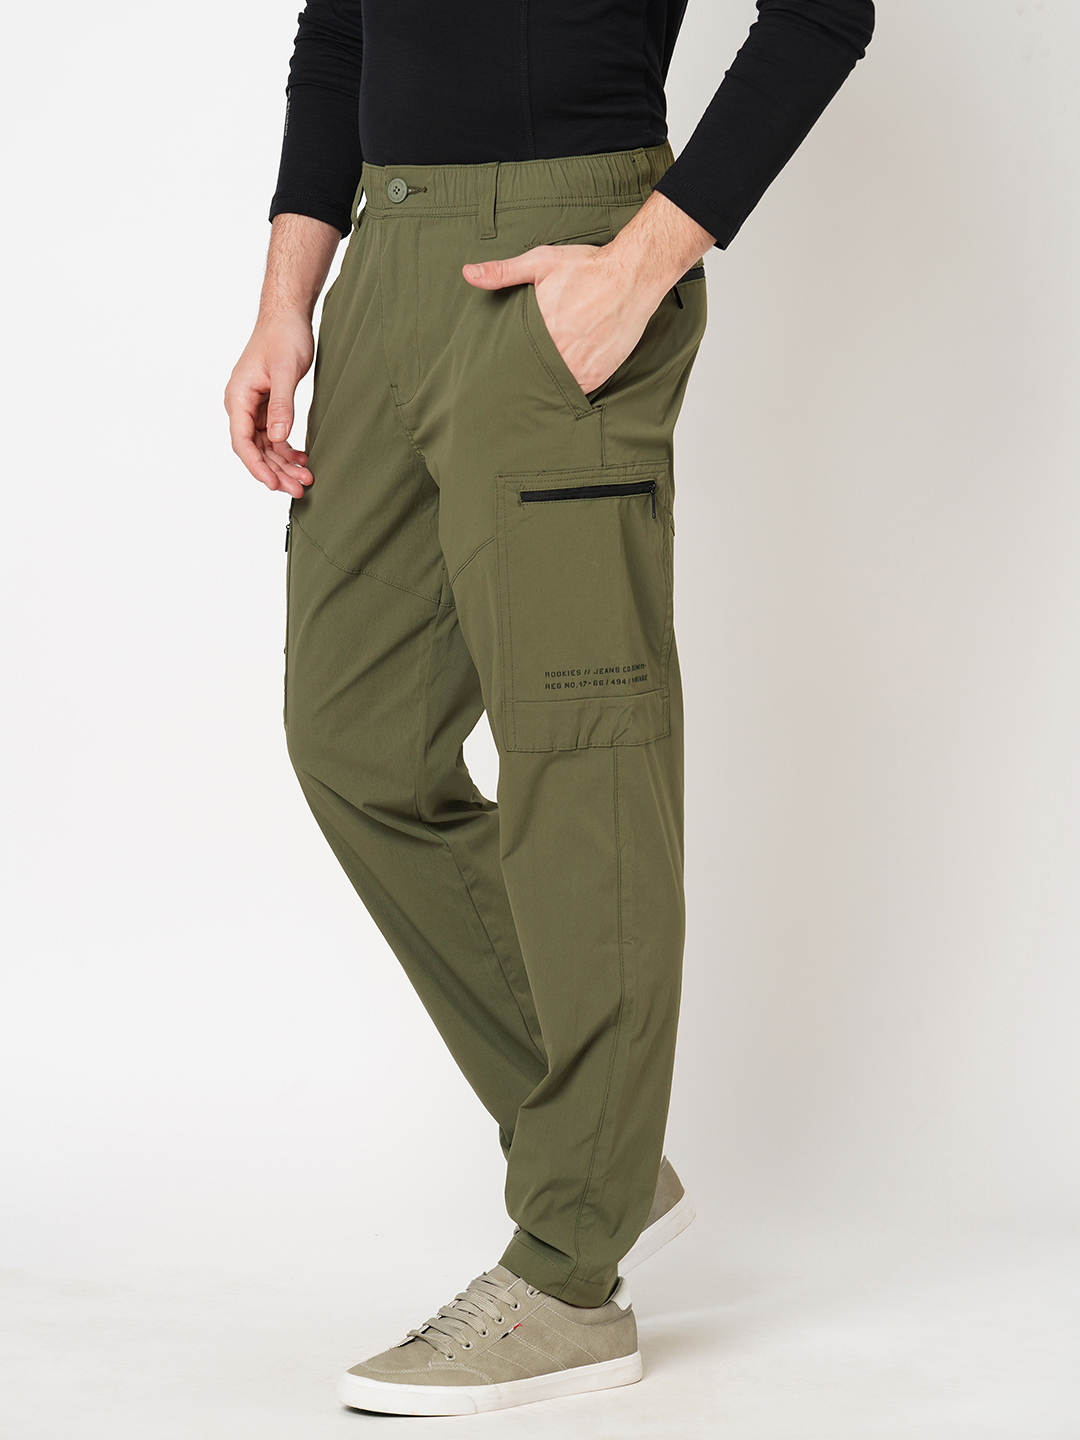 IVY GREEN UTILITY PANT (SLIM TAPERED FIT)